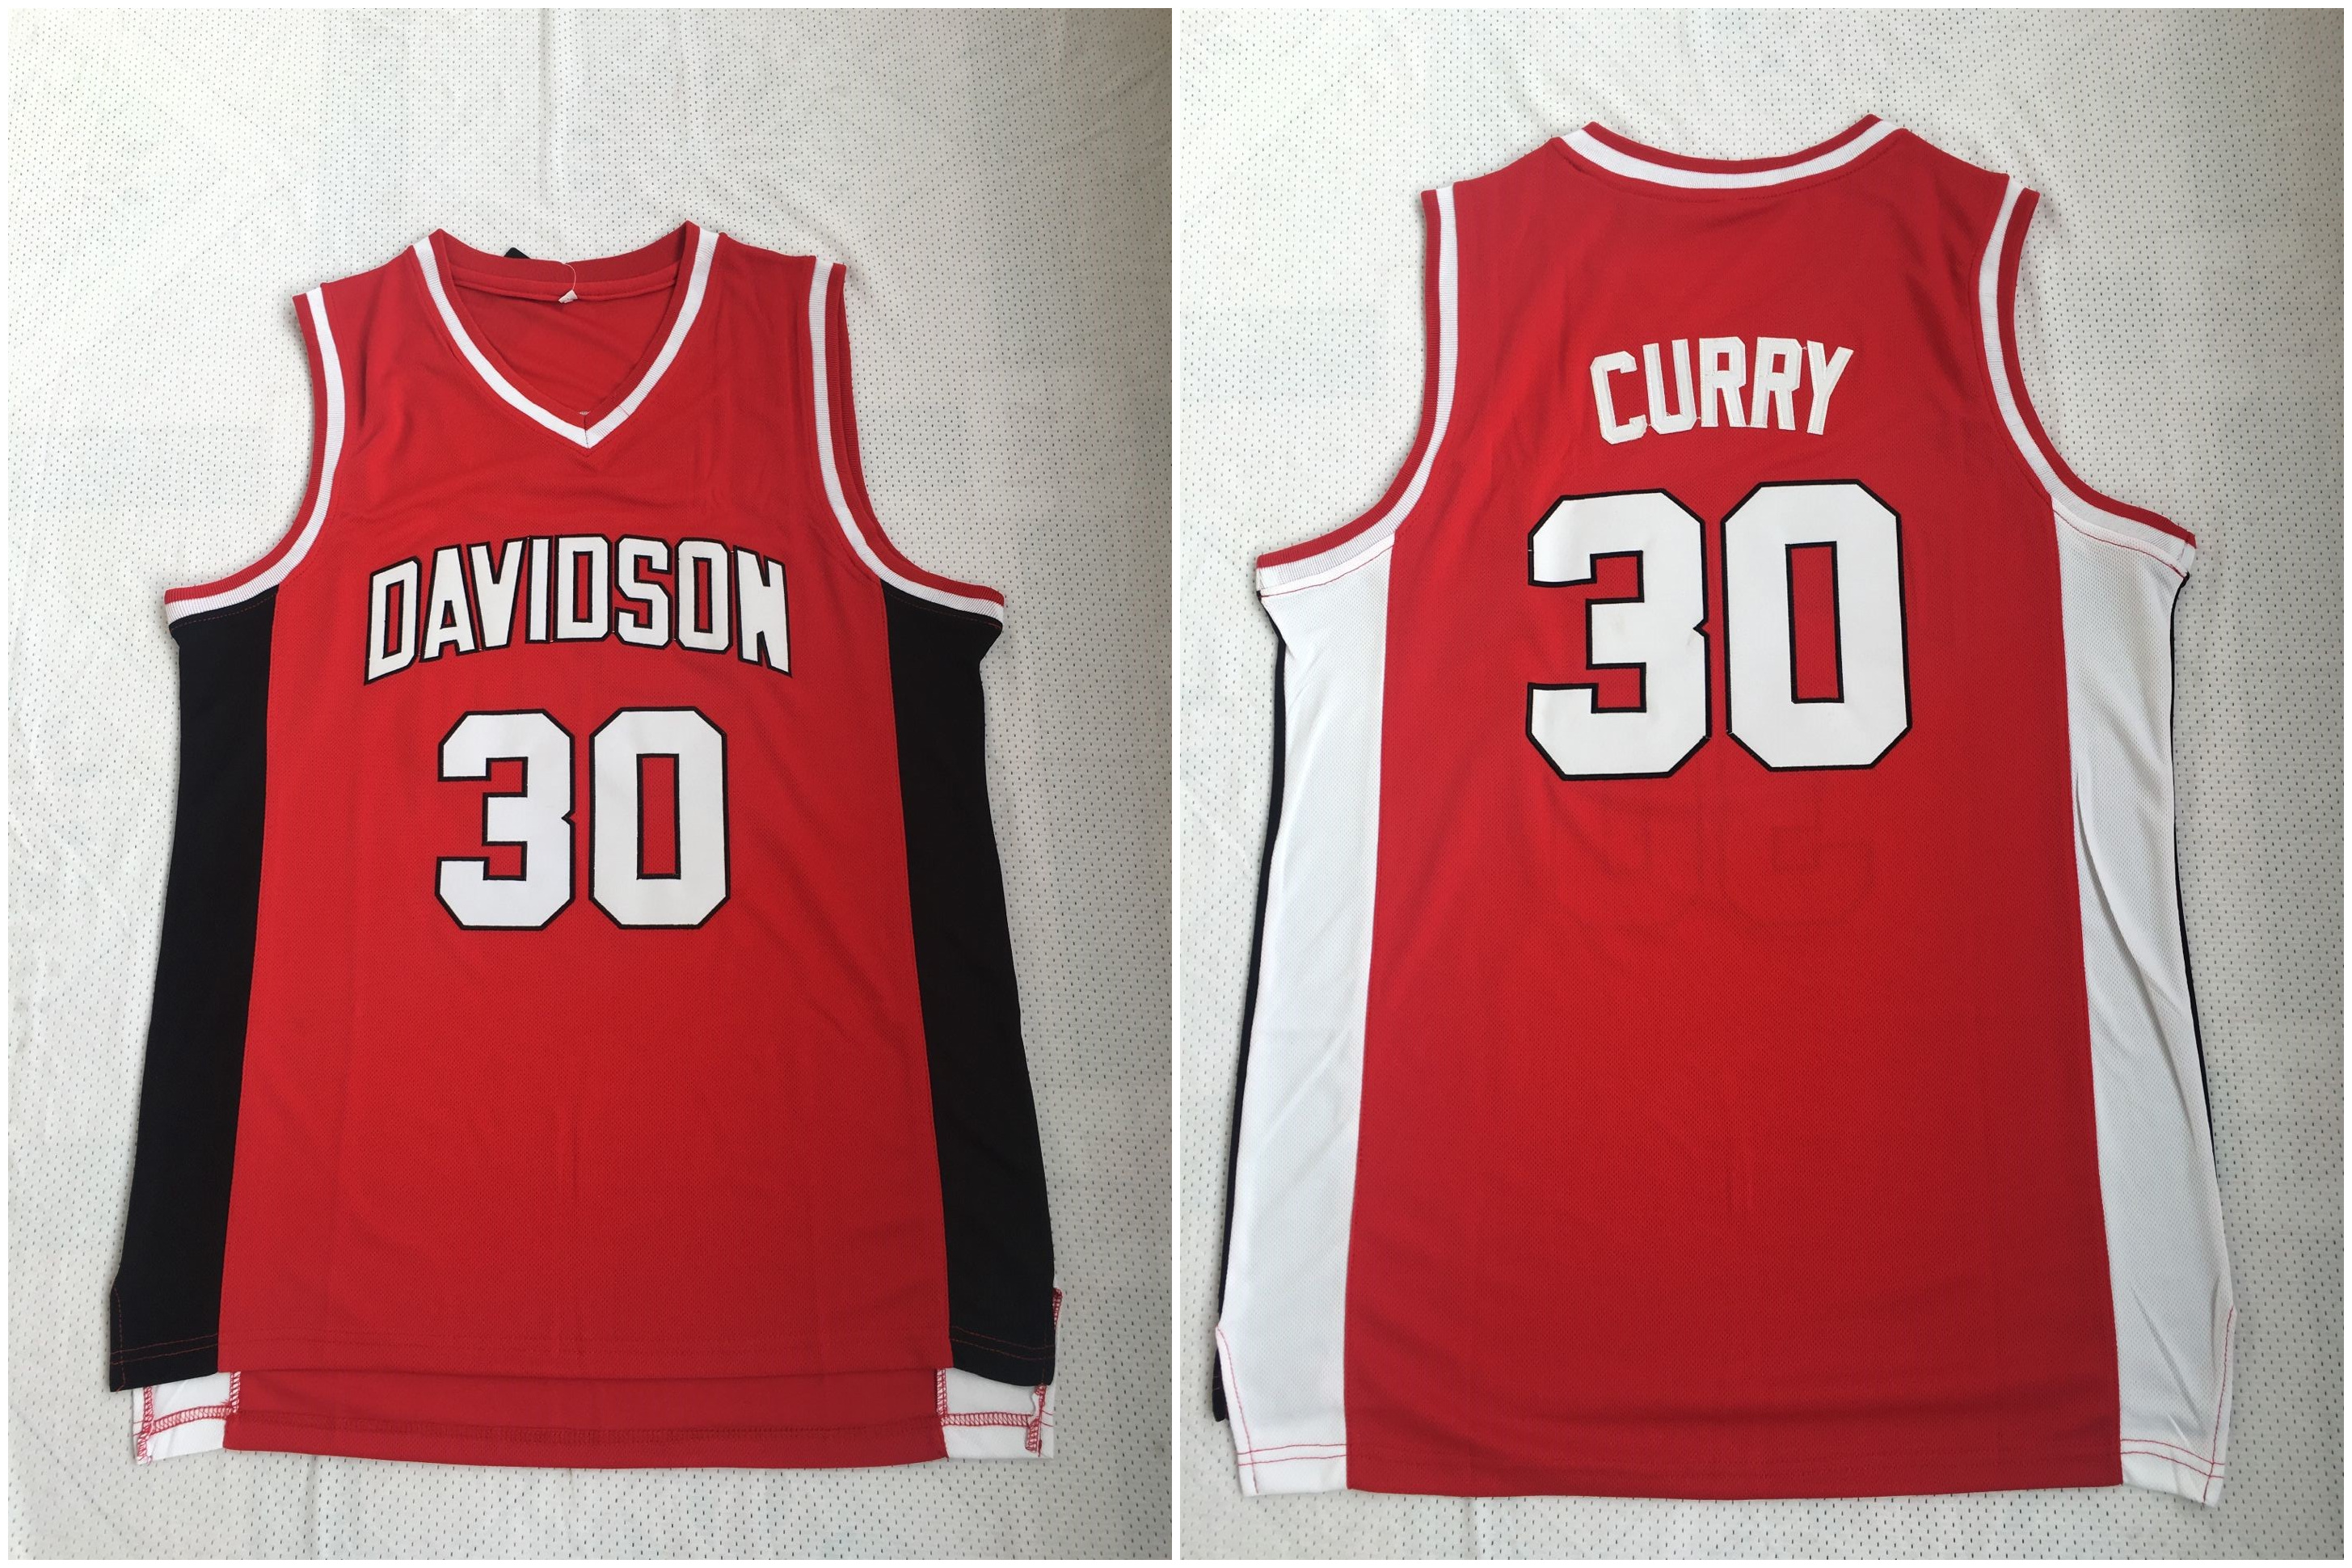 Davidson Wildcat 30 Stephen Curry Red Stitched College Basketball Jersey